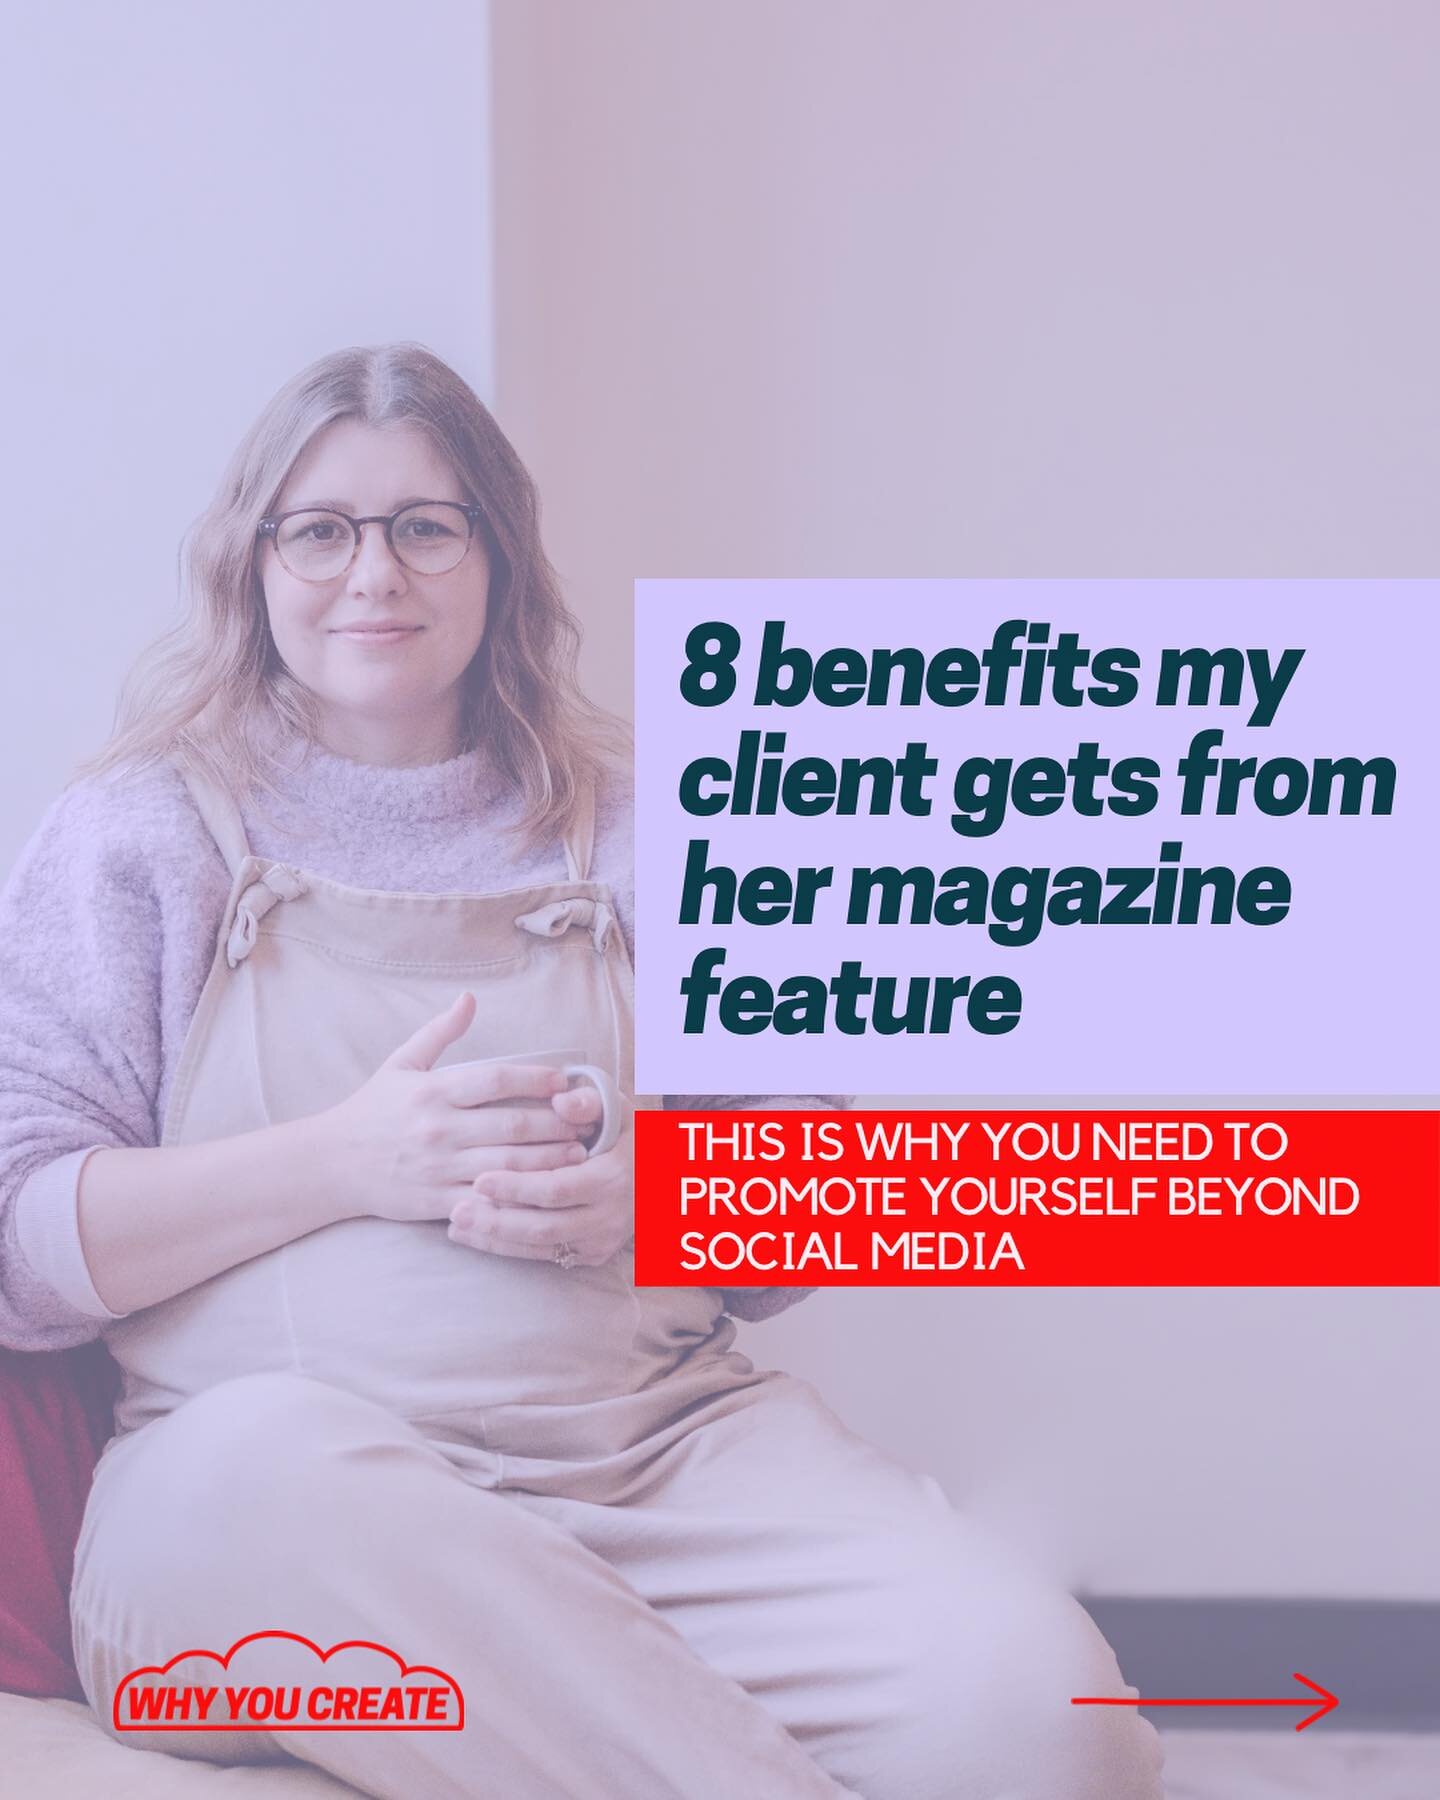 We all know PR will grow your audience and build your reputation&hellip; but let me walk you through this using a recent client as an example 🎉

Swipe through for 8 benefits my client gets from her magazine feature. Did any surprise you? 

There&rsq